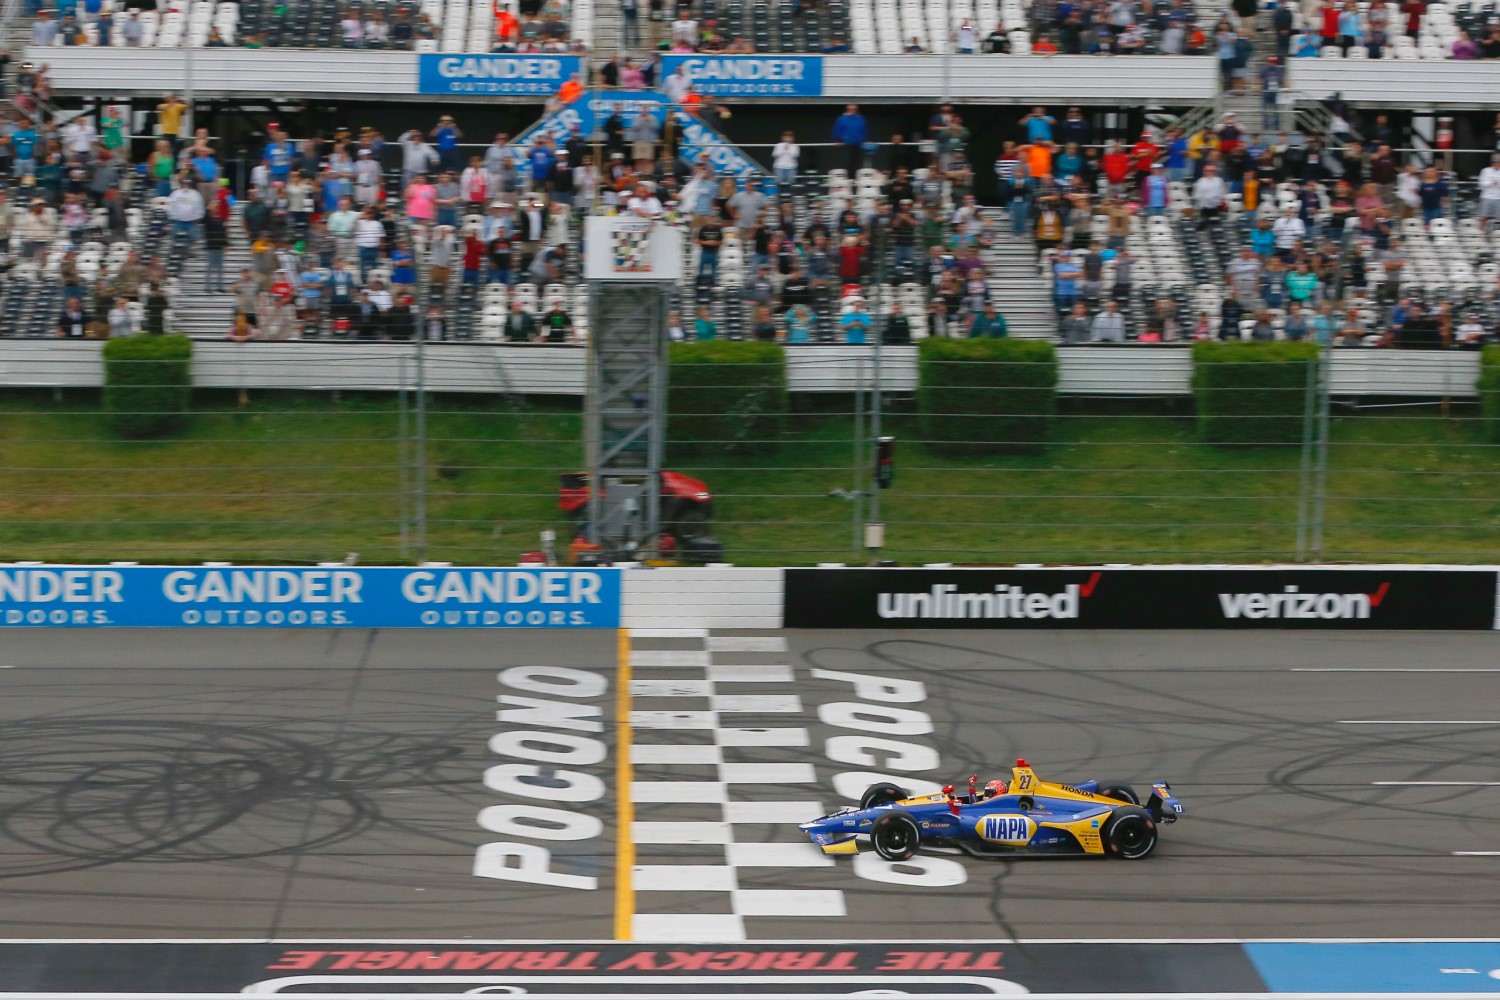 Rossi takes win in 2018 at Pocono. With no support series races during the Pocono weekend, there is too much downtime between times when the IndyCars are on track. This event looks destined for failure like so many IndyCar oval track events in the past